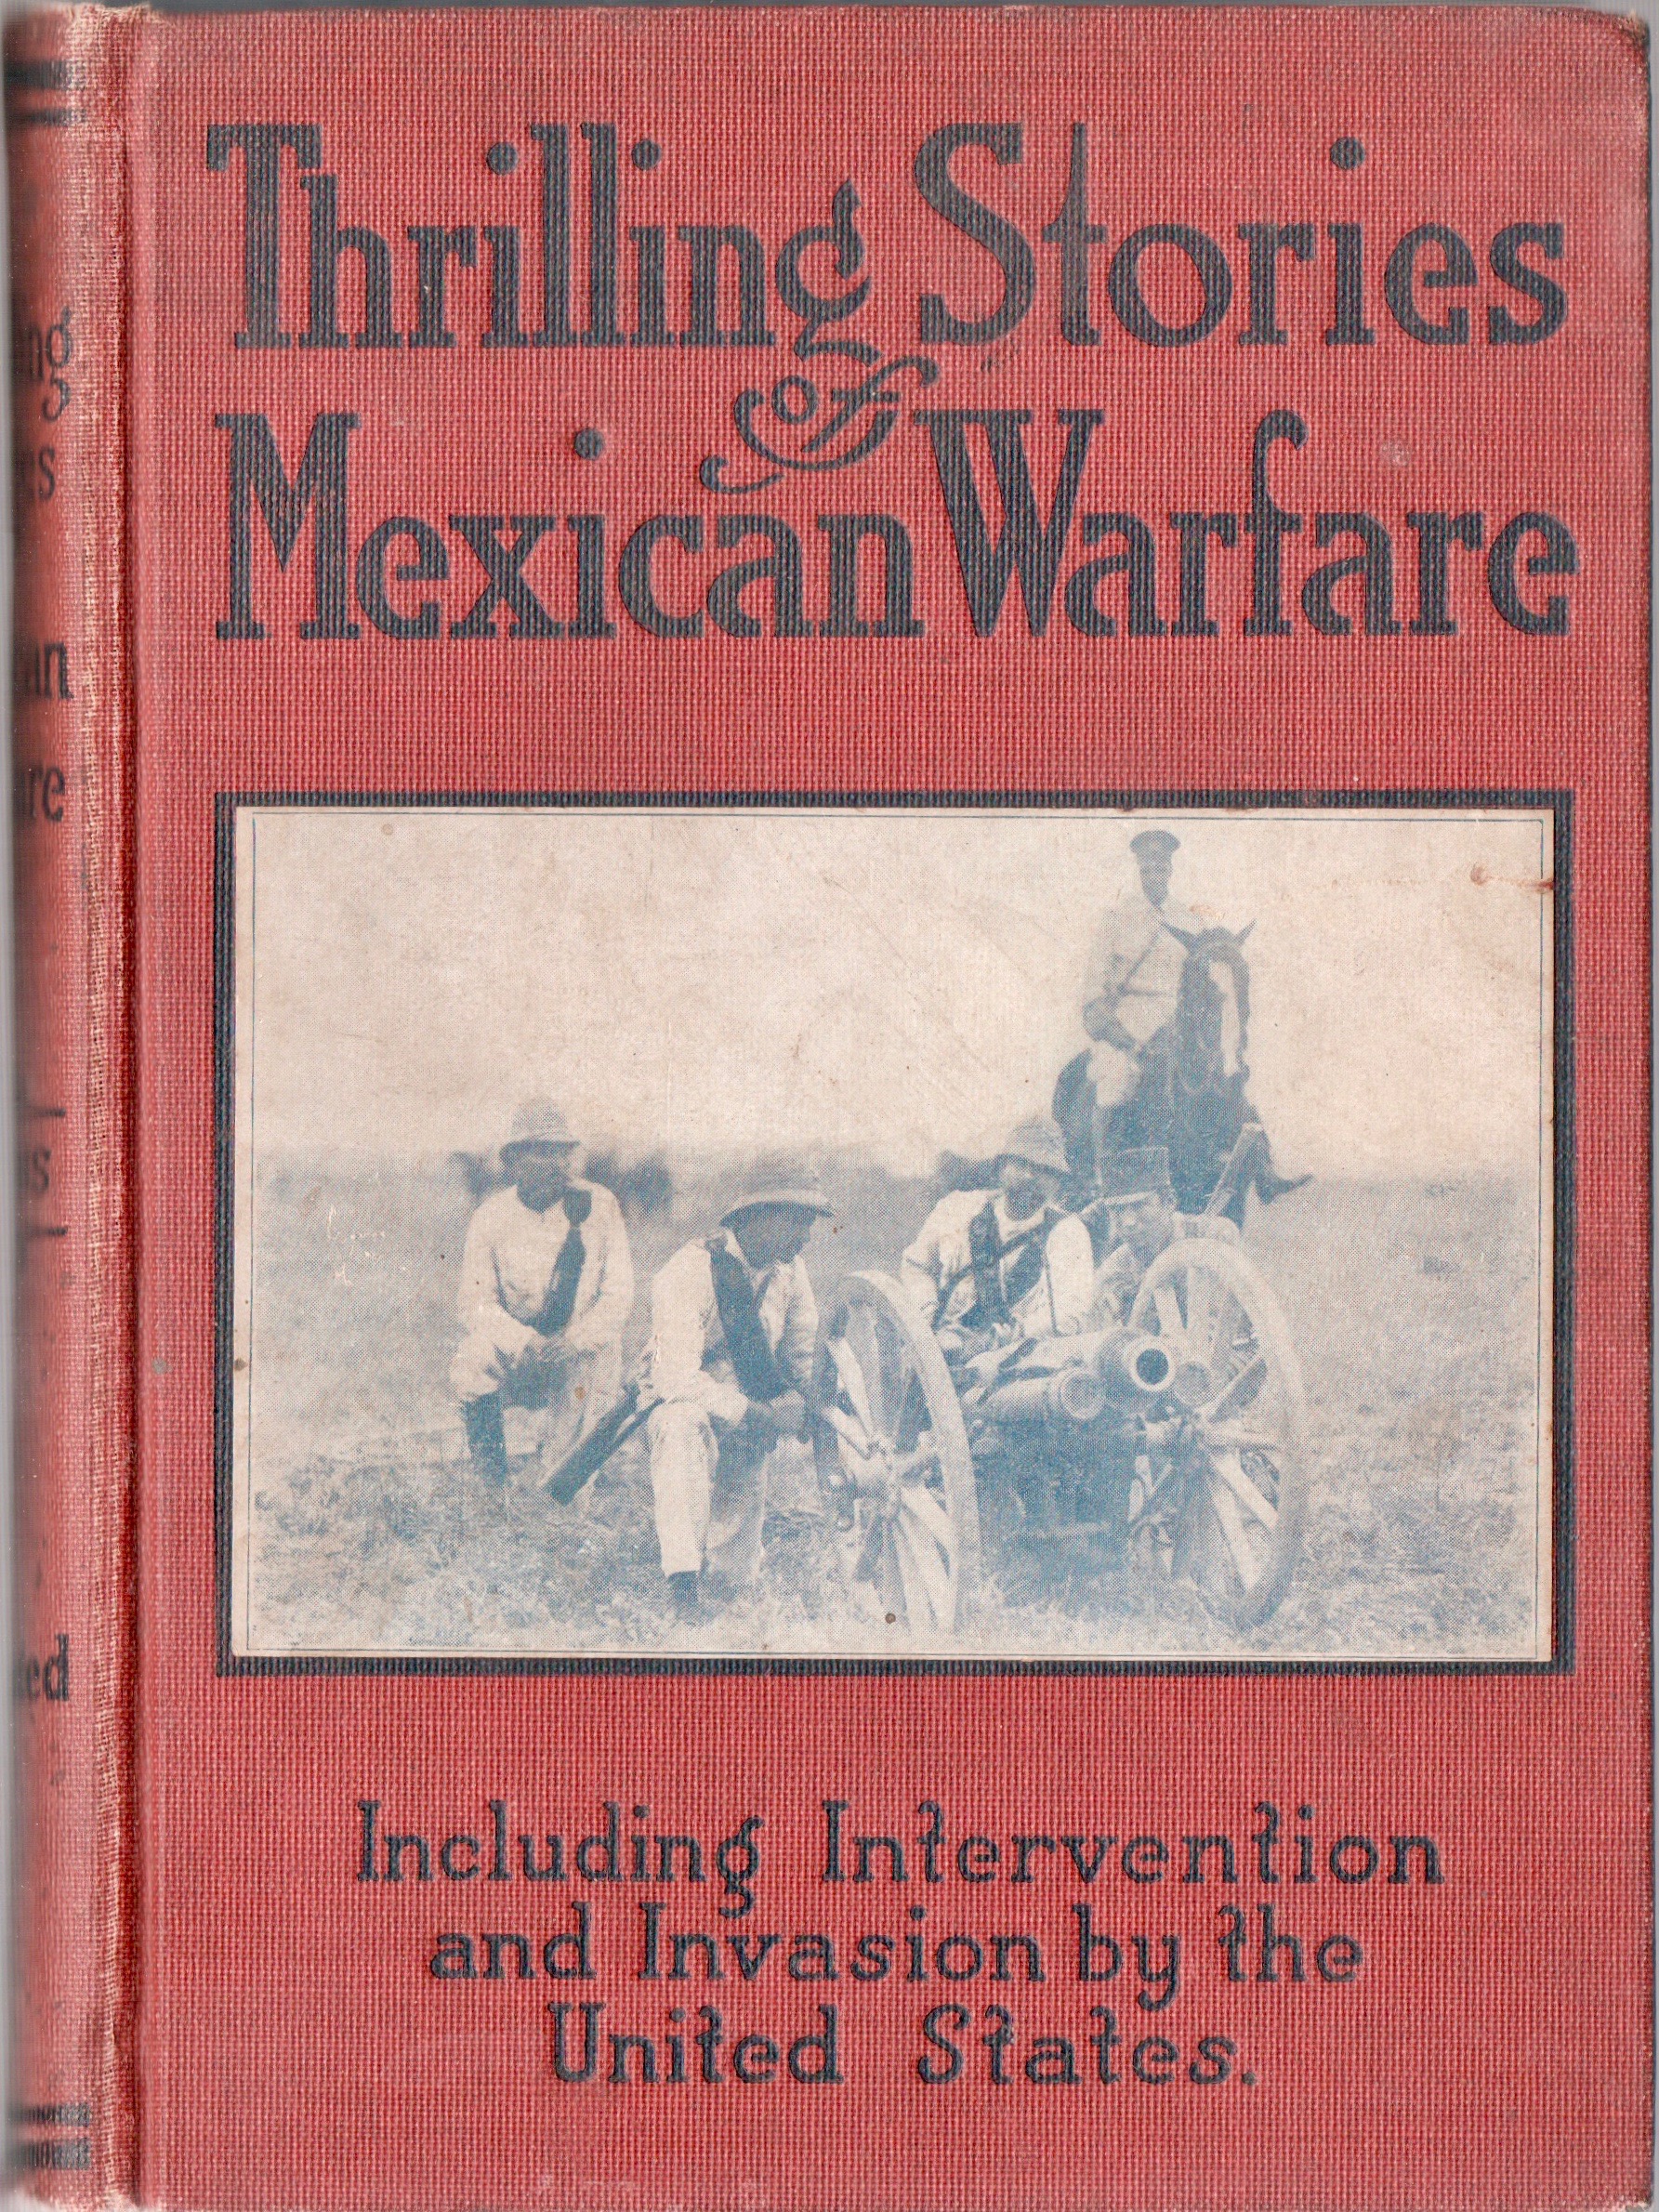 Thrilling Stories of Mexican Warfare Cover.jpg